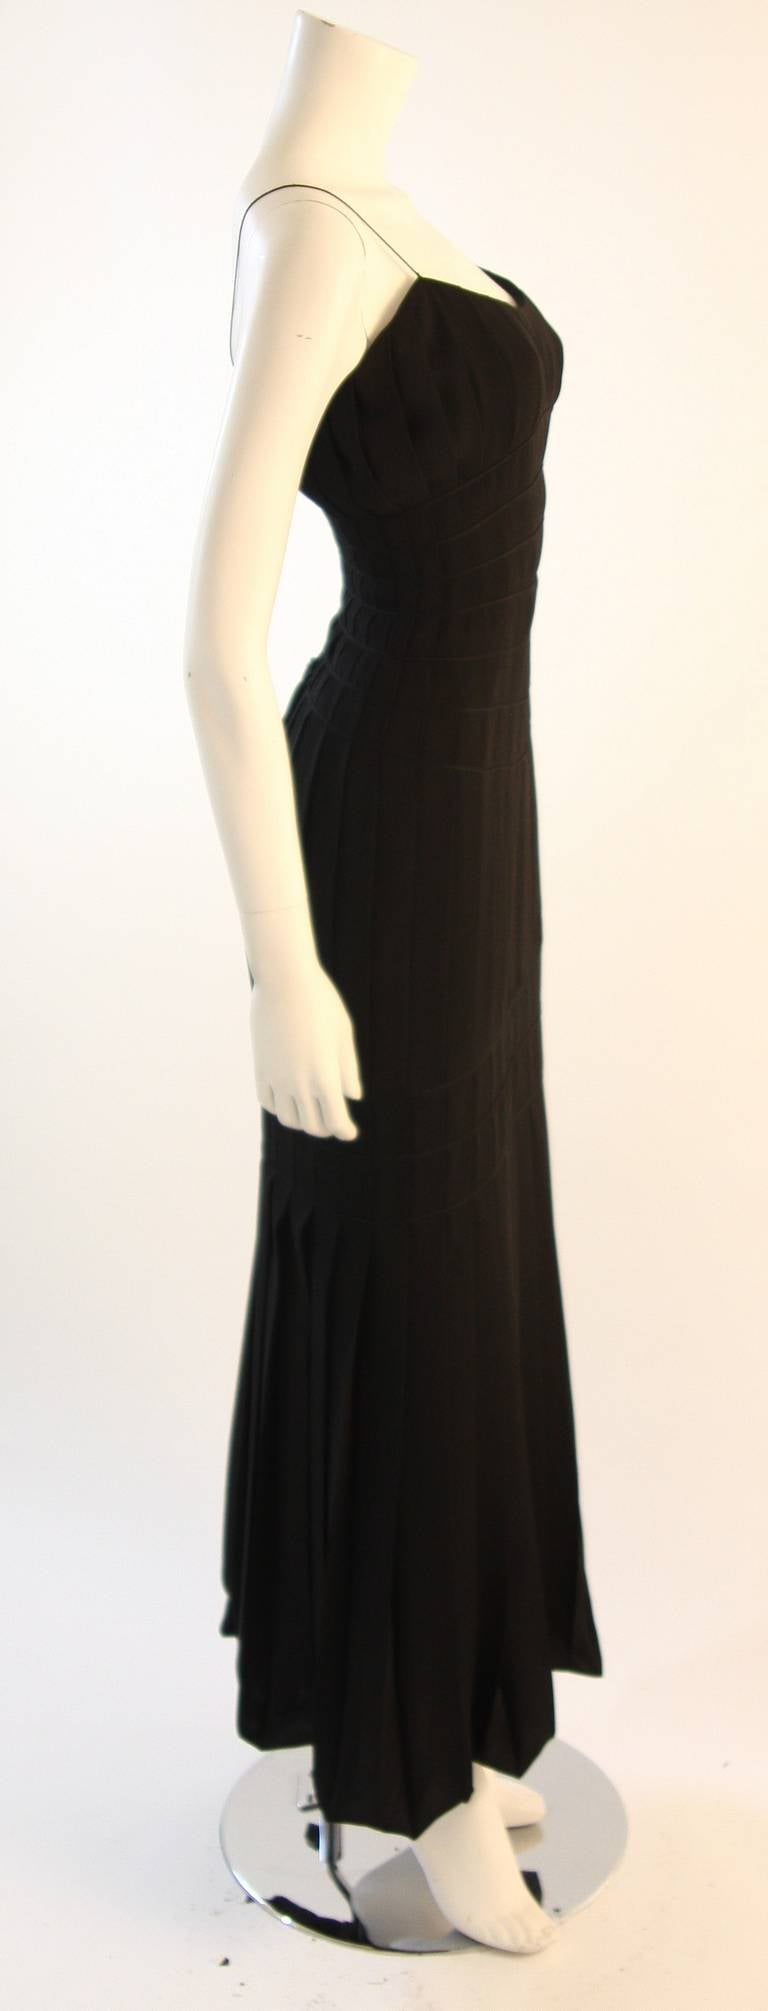 Gorgeous Thierry Mugler Silk Pleated Evening Gown with Tassels Size 38 In Excellent Condition For Sale In Los Angeles, CA